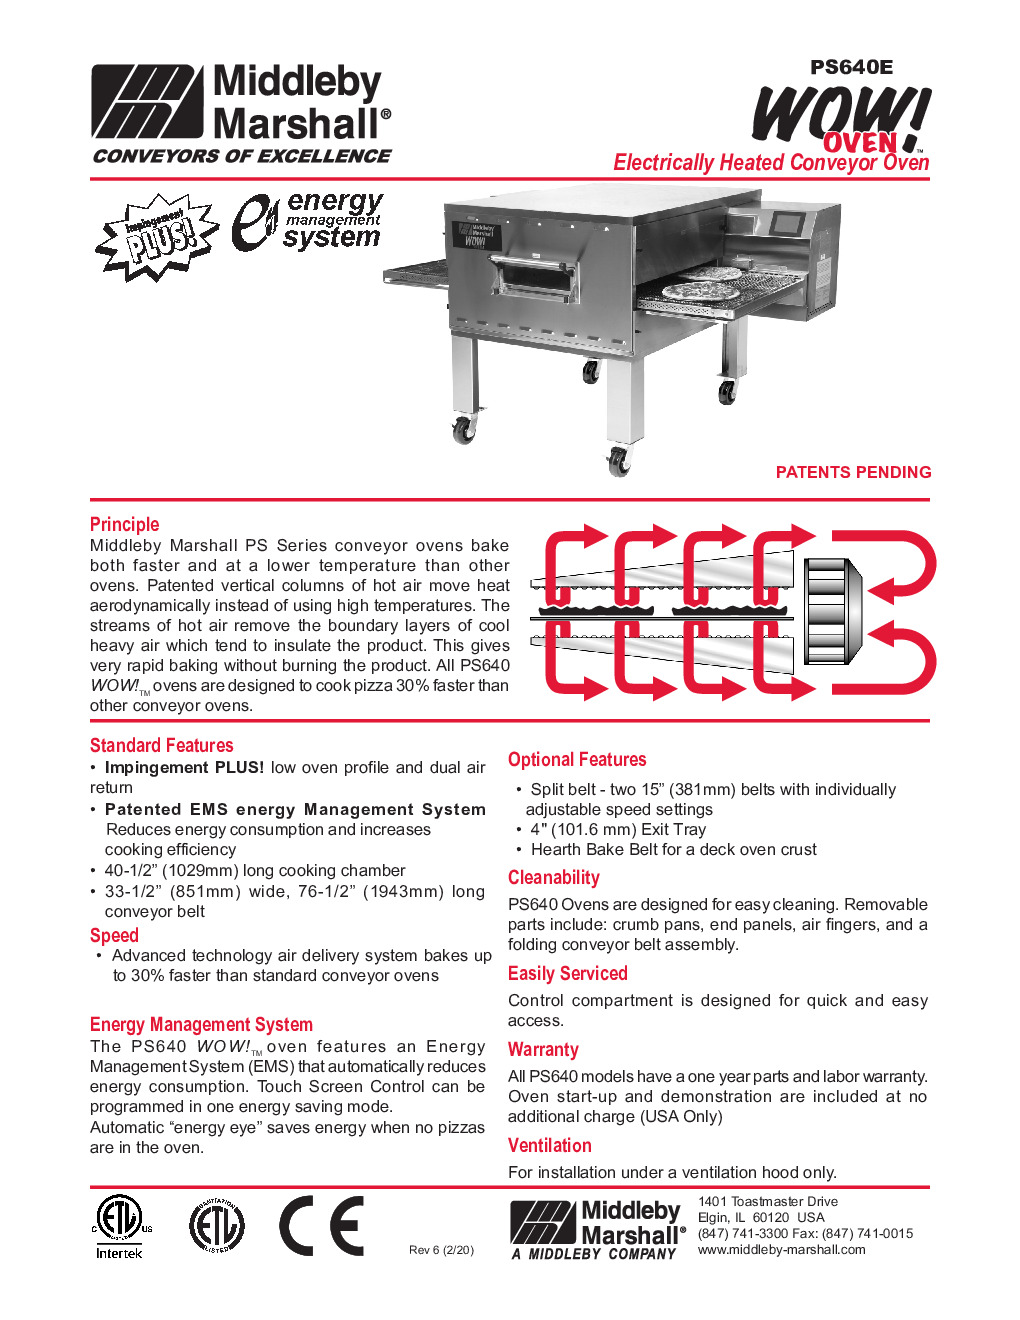 Middleby Marshall PS640E-2 Conveyor Electric Oven